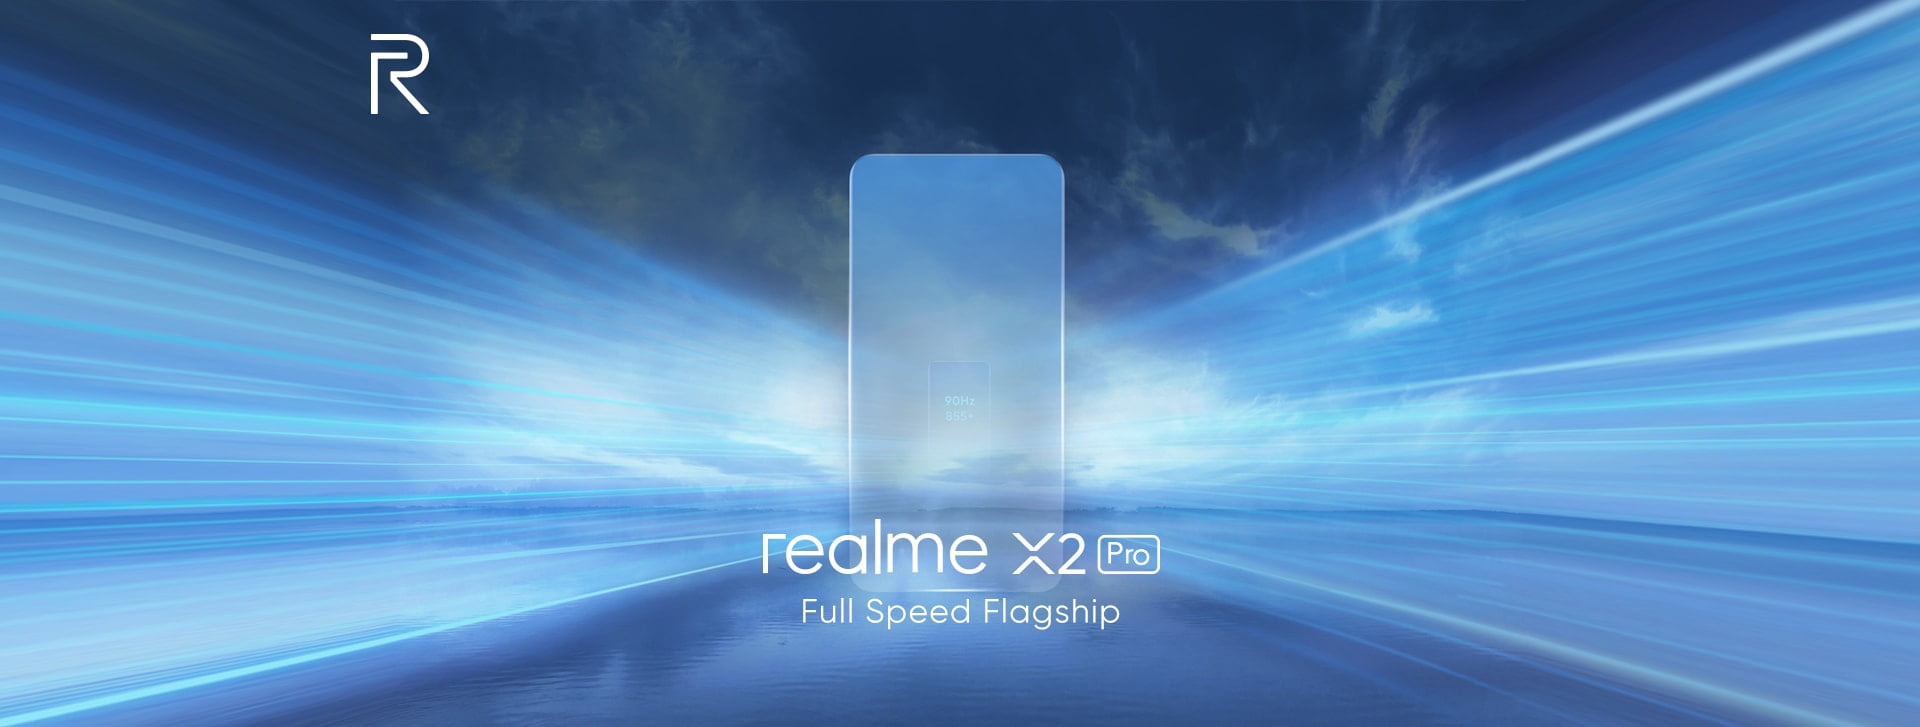 Realme X2 Pro with Snapdragon 855+, 90Hz display & 64 MP quad-camera launching in Madrid on the 15th of October